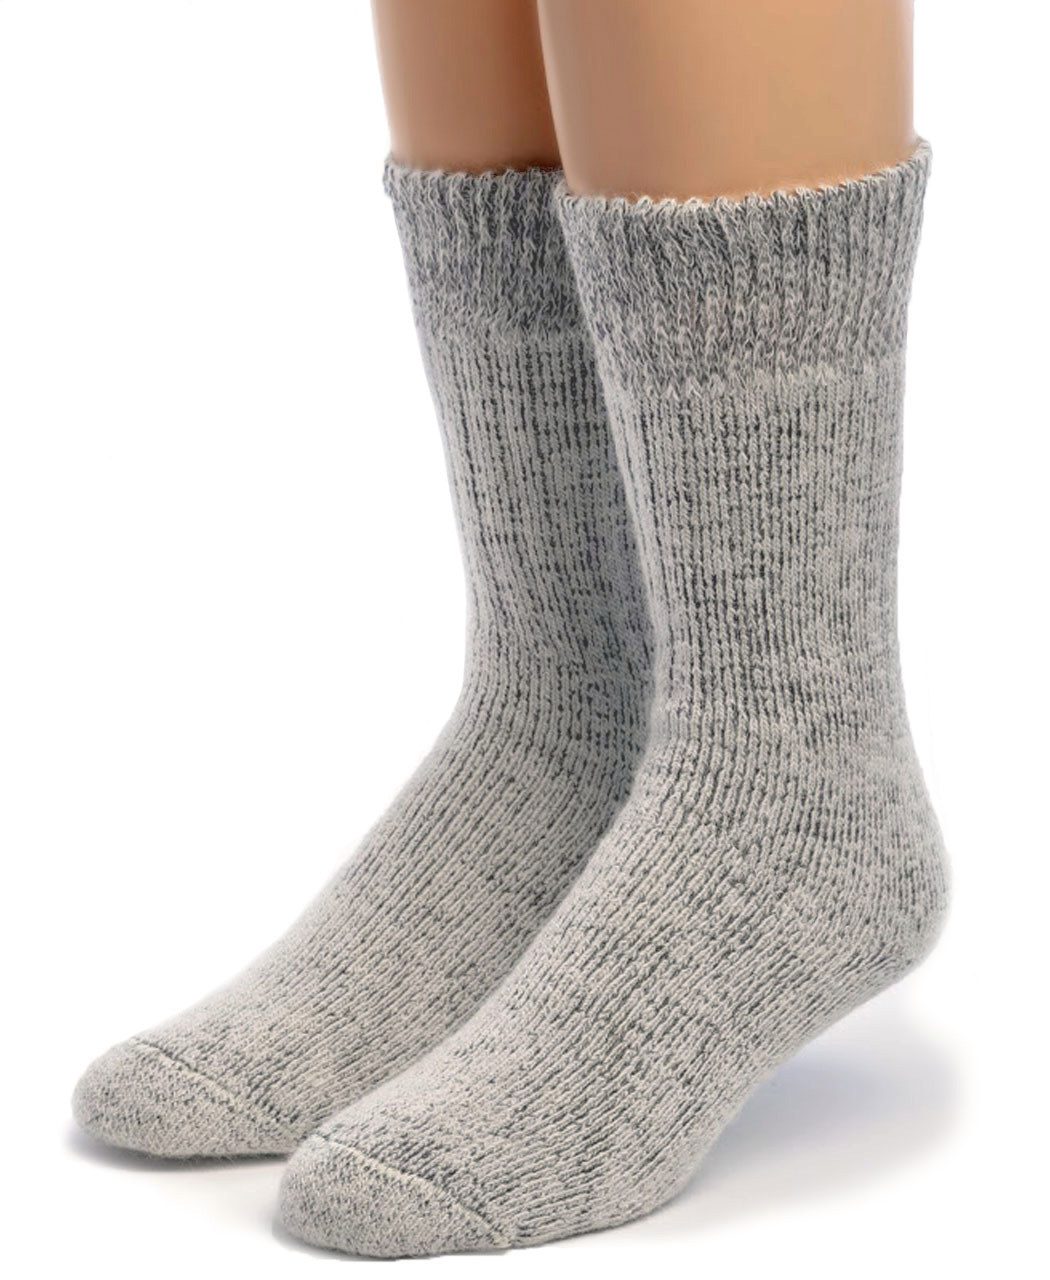 Warm those cold feet with the best fuzzy socks around - Reviewed